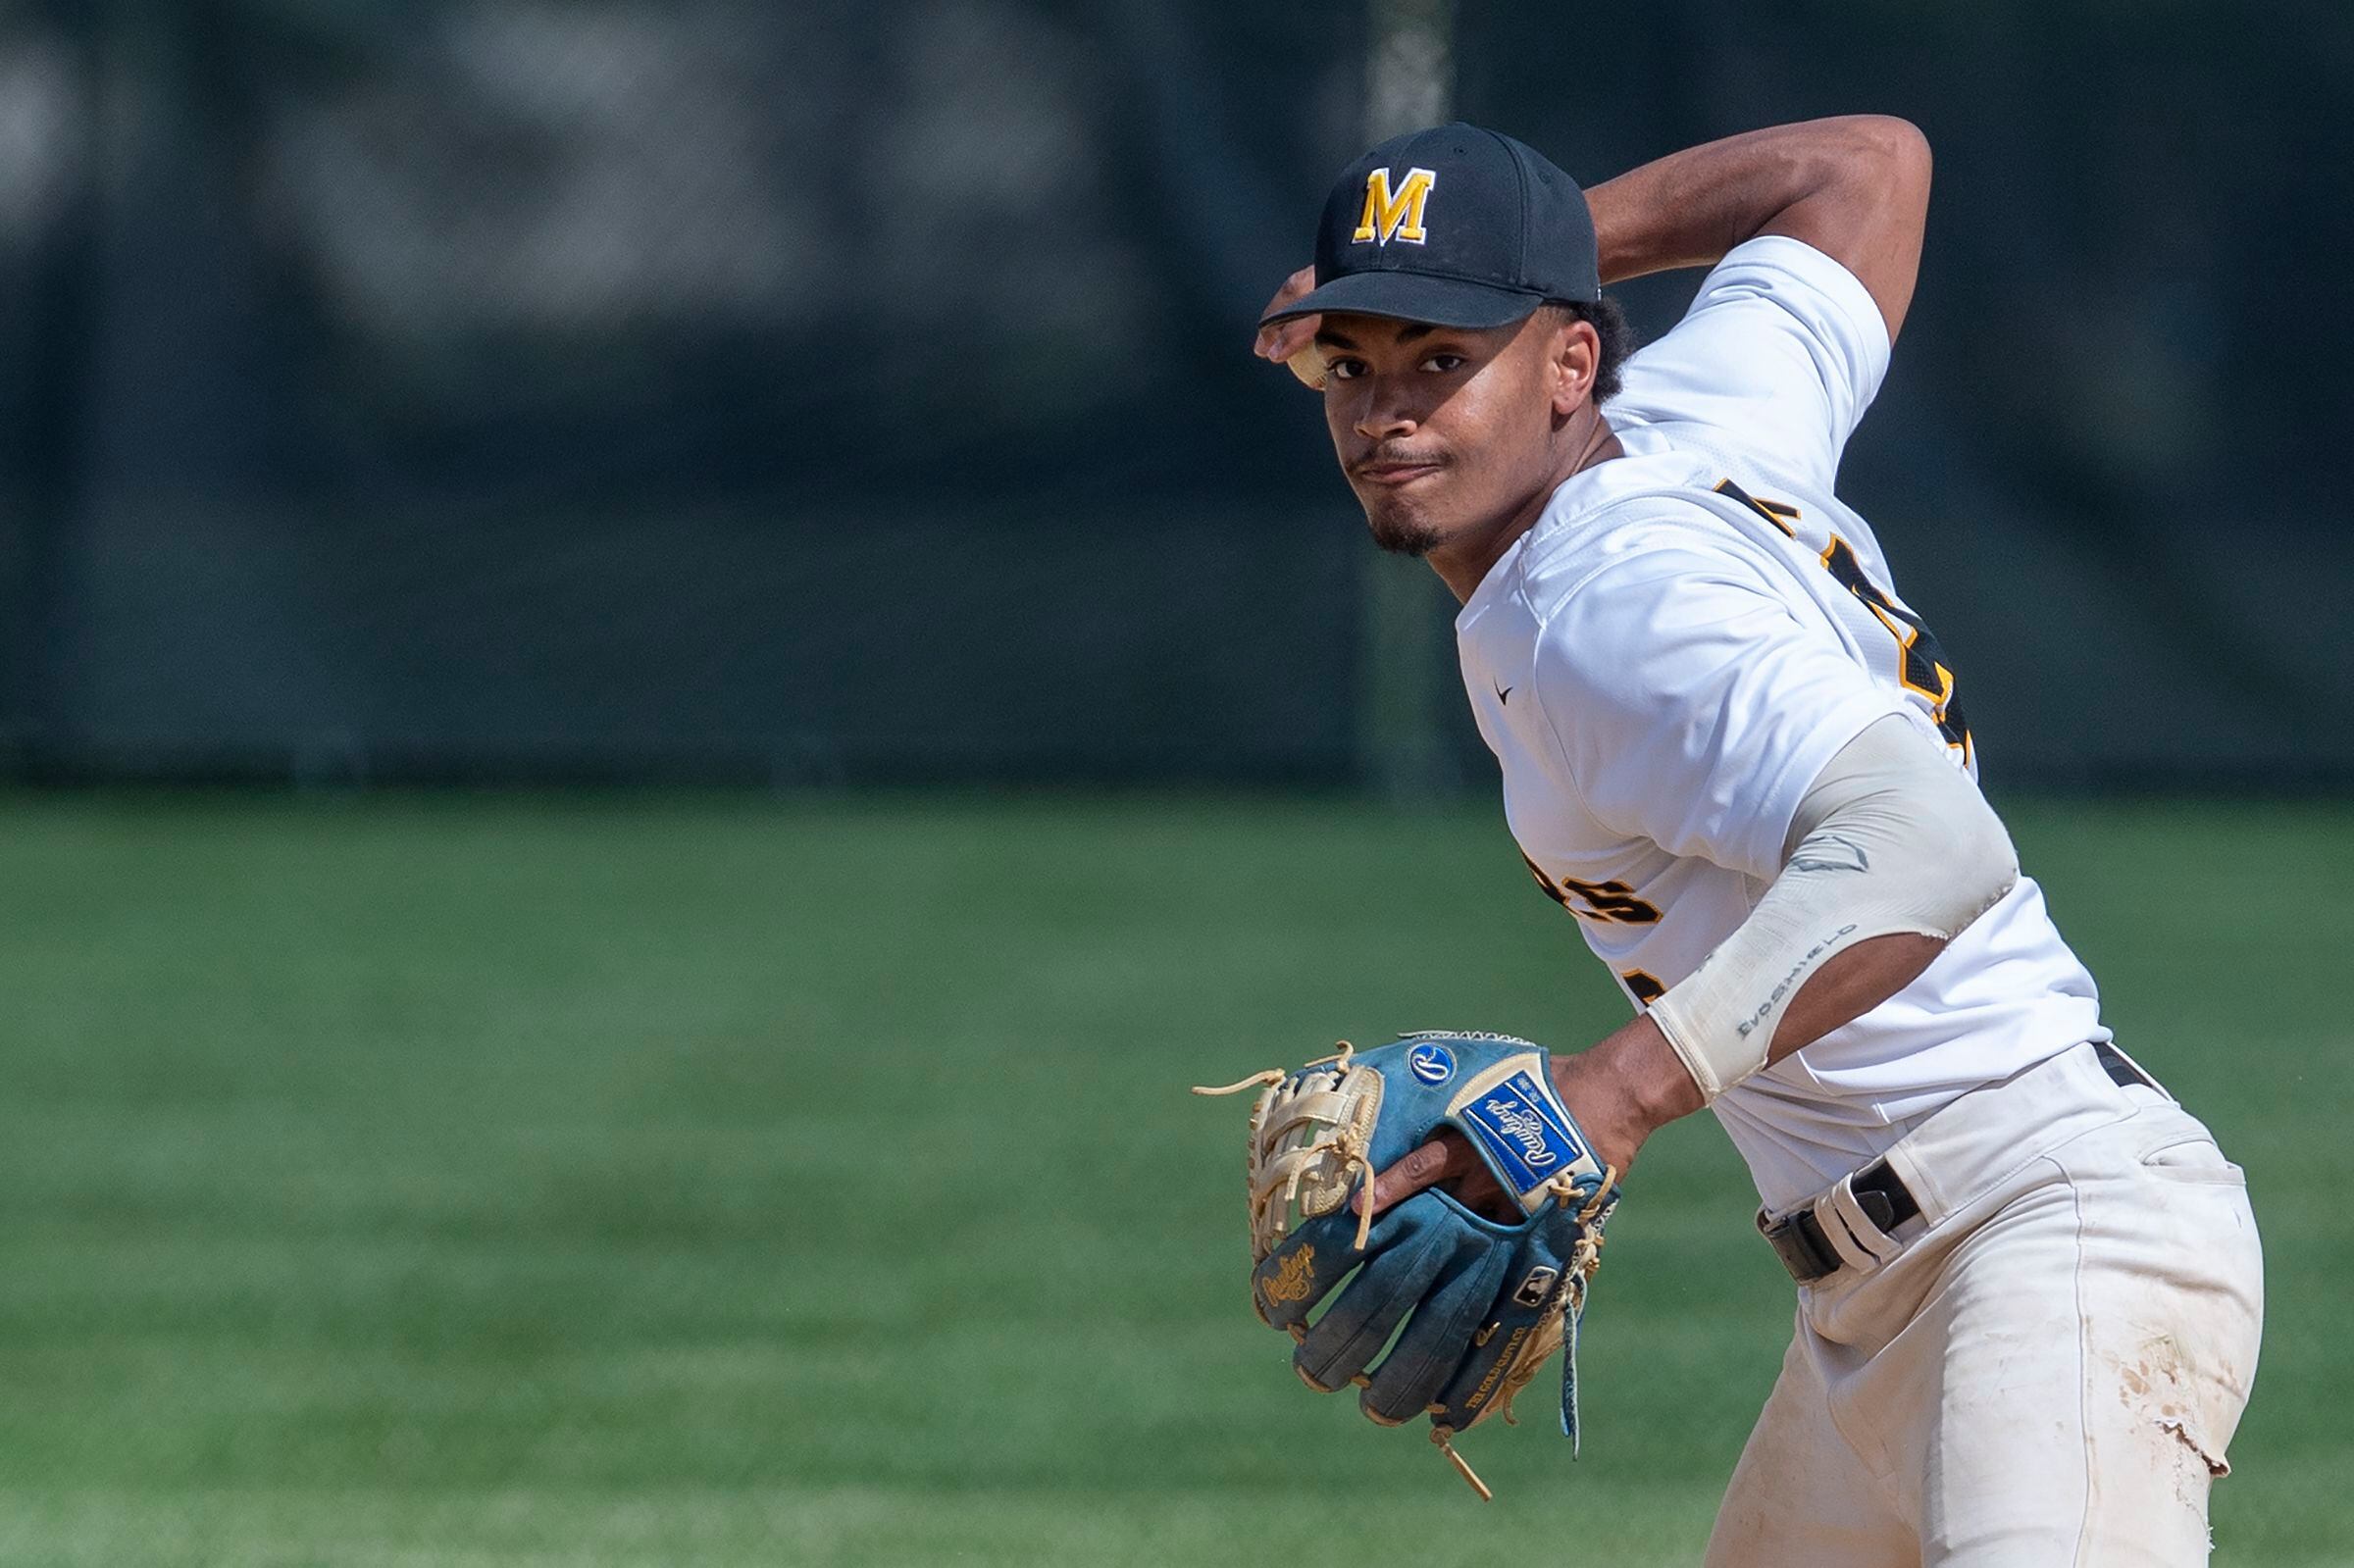 Shortstop Maximus Martin heads to Rutgers with lessons learned